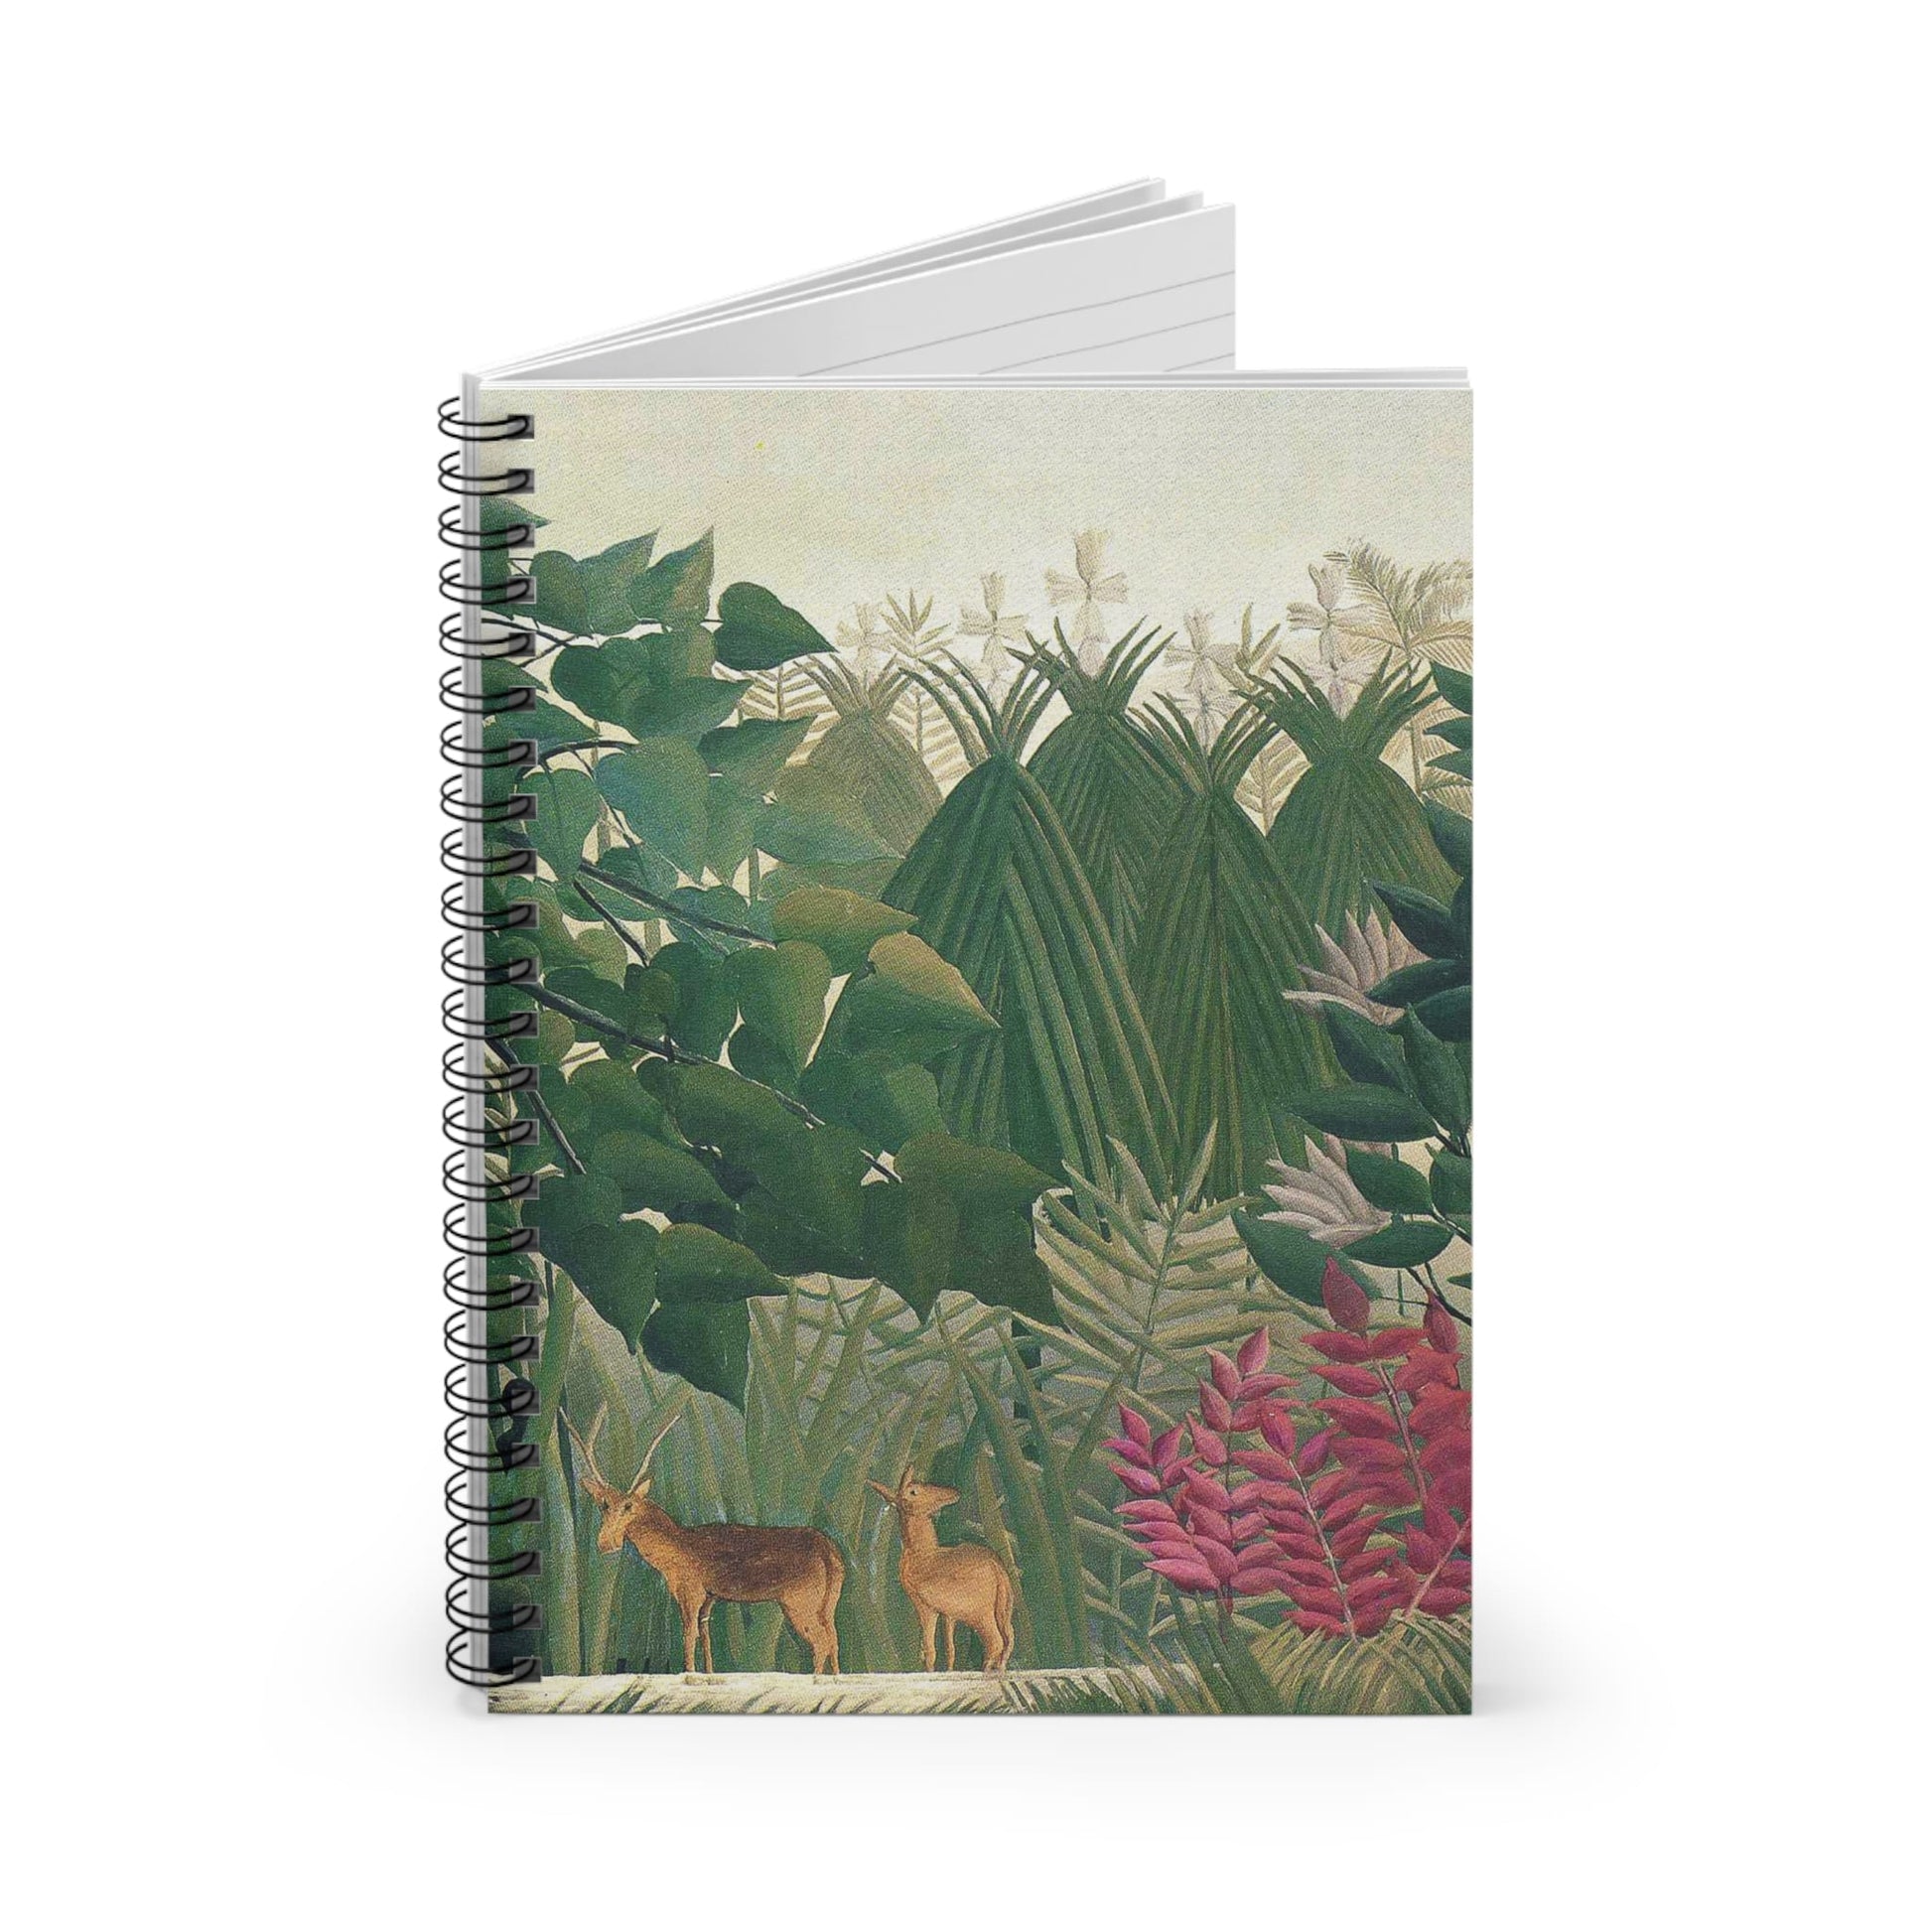 Jungle Spiral Notebook Standing up on White Desk